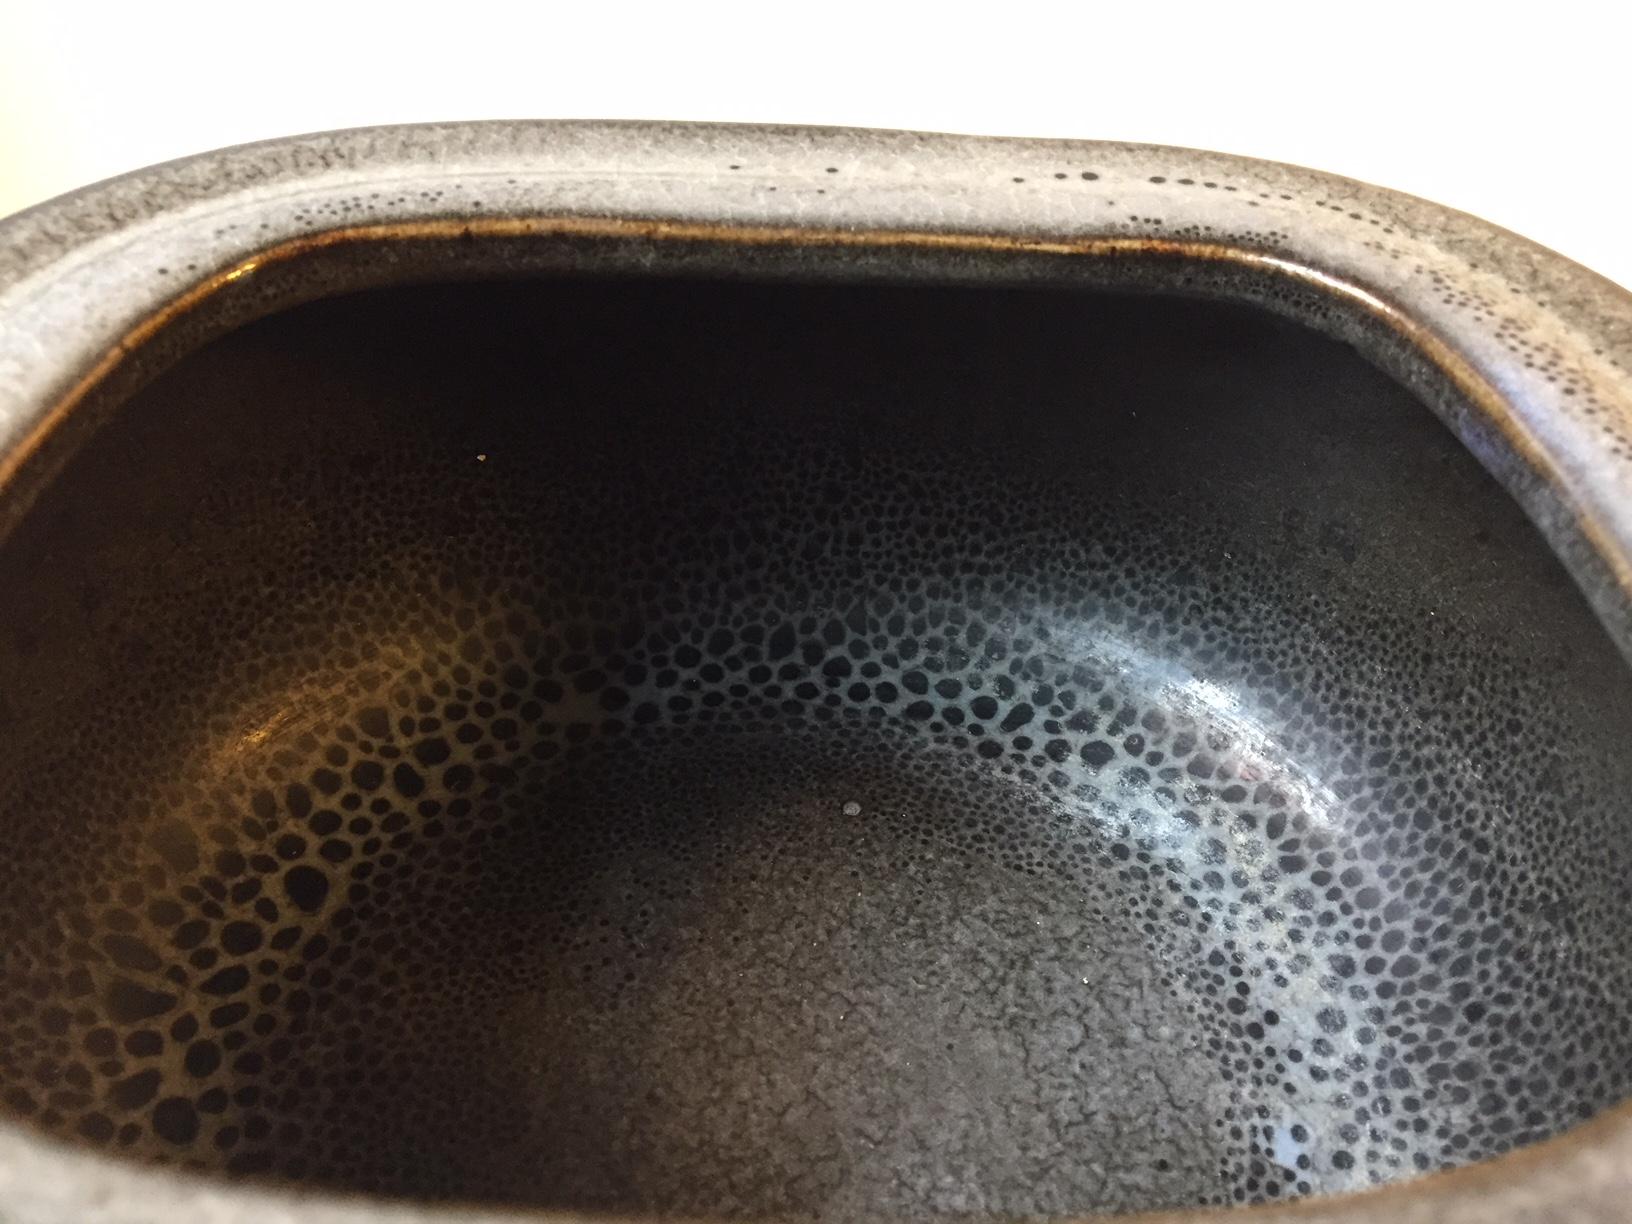 The model number 22346 refers to the shape of the bowl. The black, grey and earthy glazes applied are made by hand and unique to this piece. It was designed by the Danish ceramist Eva Stæhr-Nielsen between 1969-1974 as indicated by the makers mark.